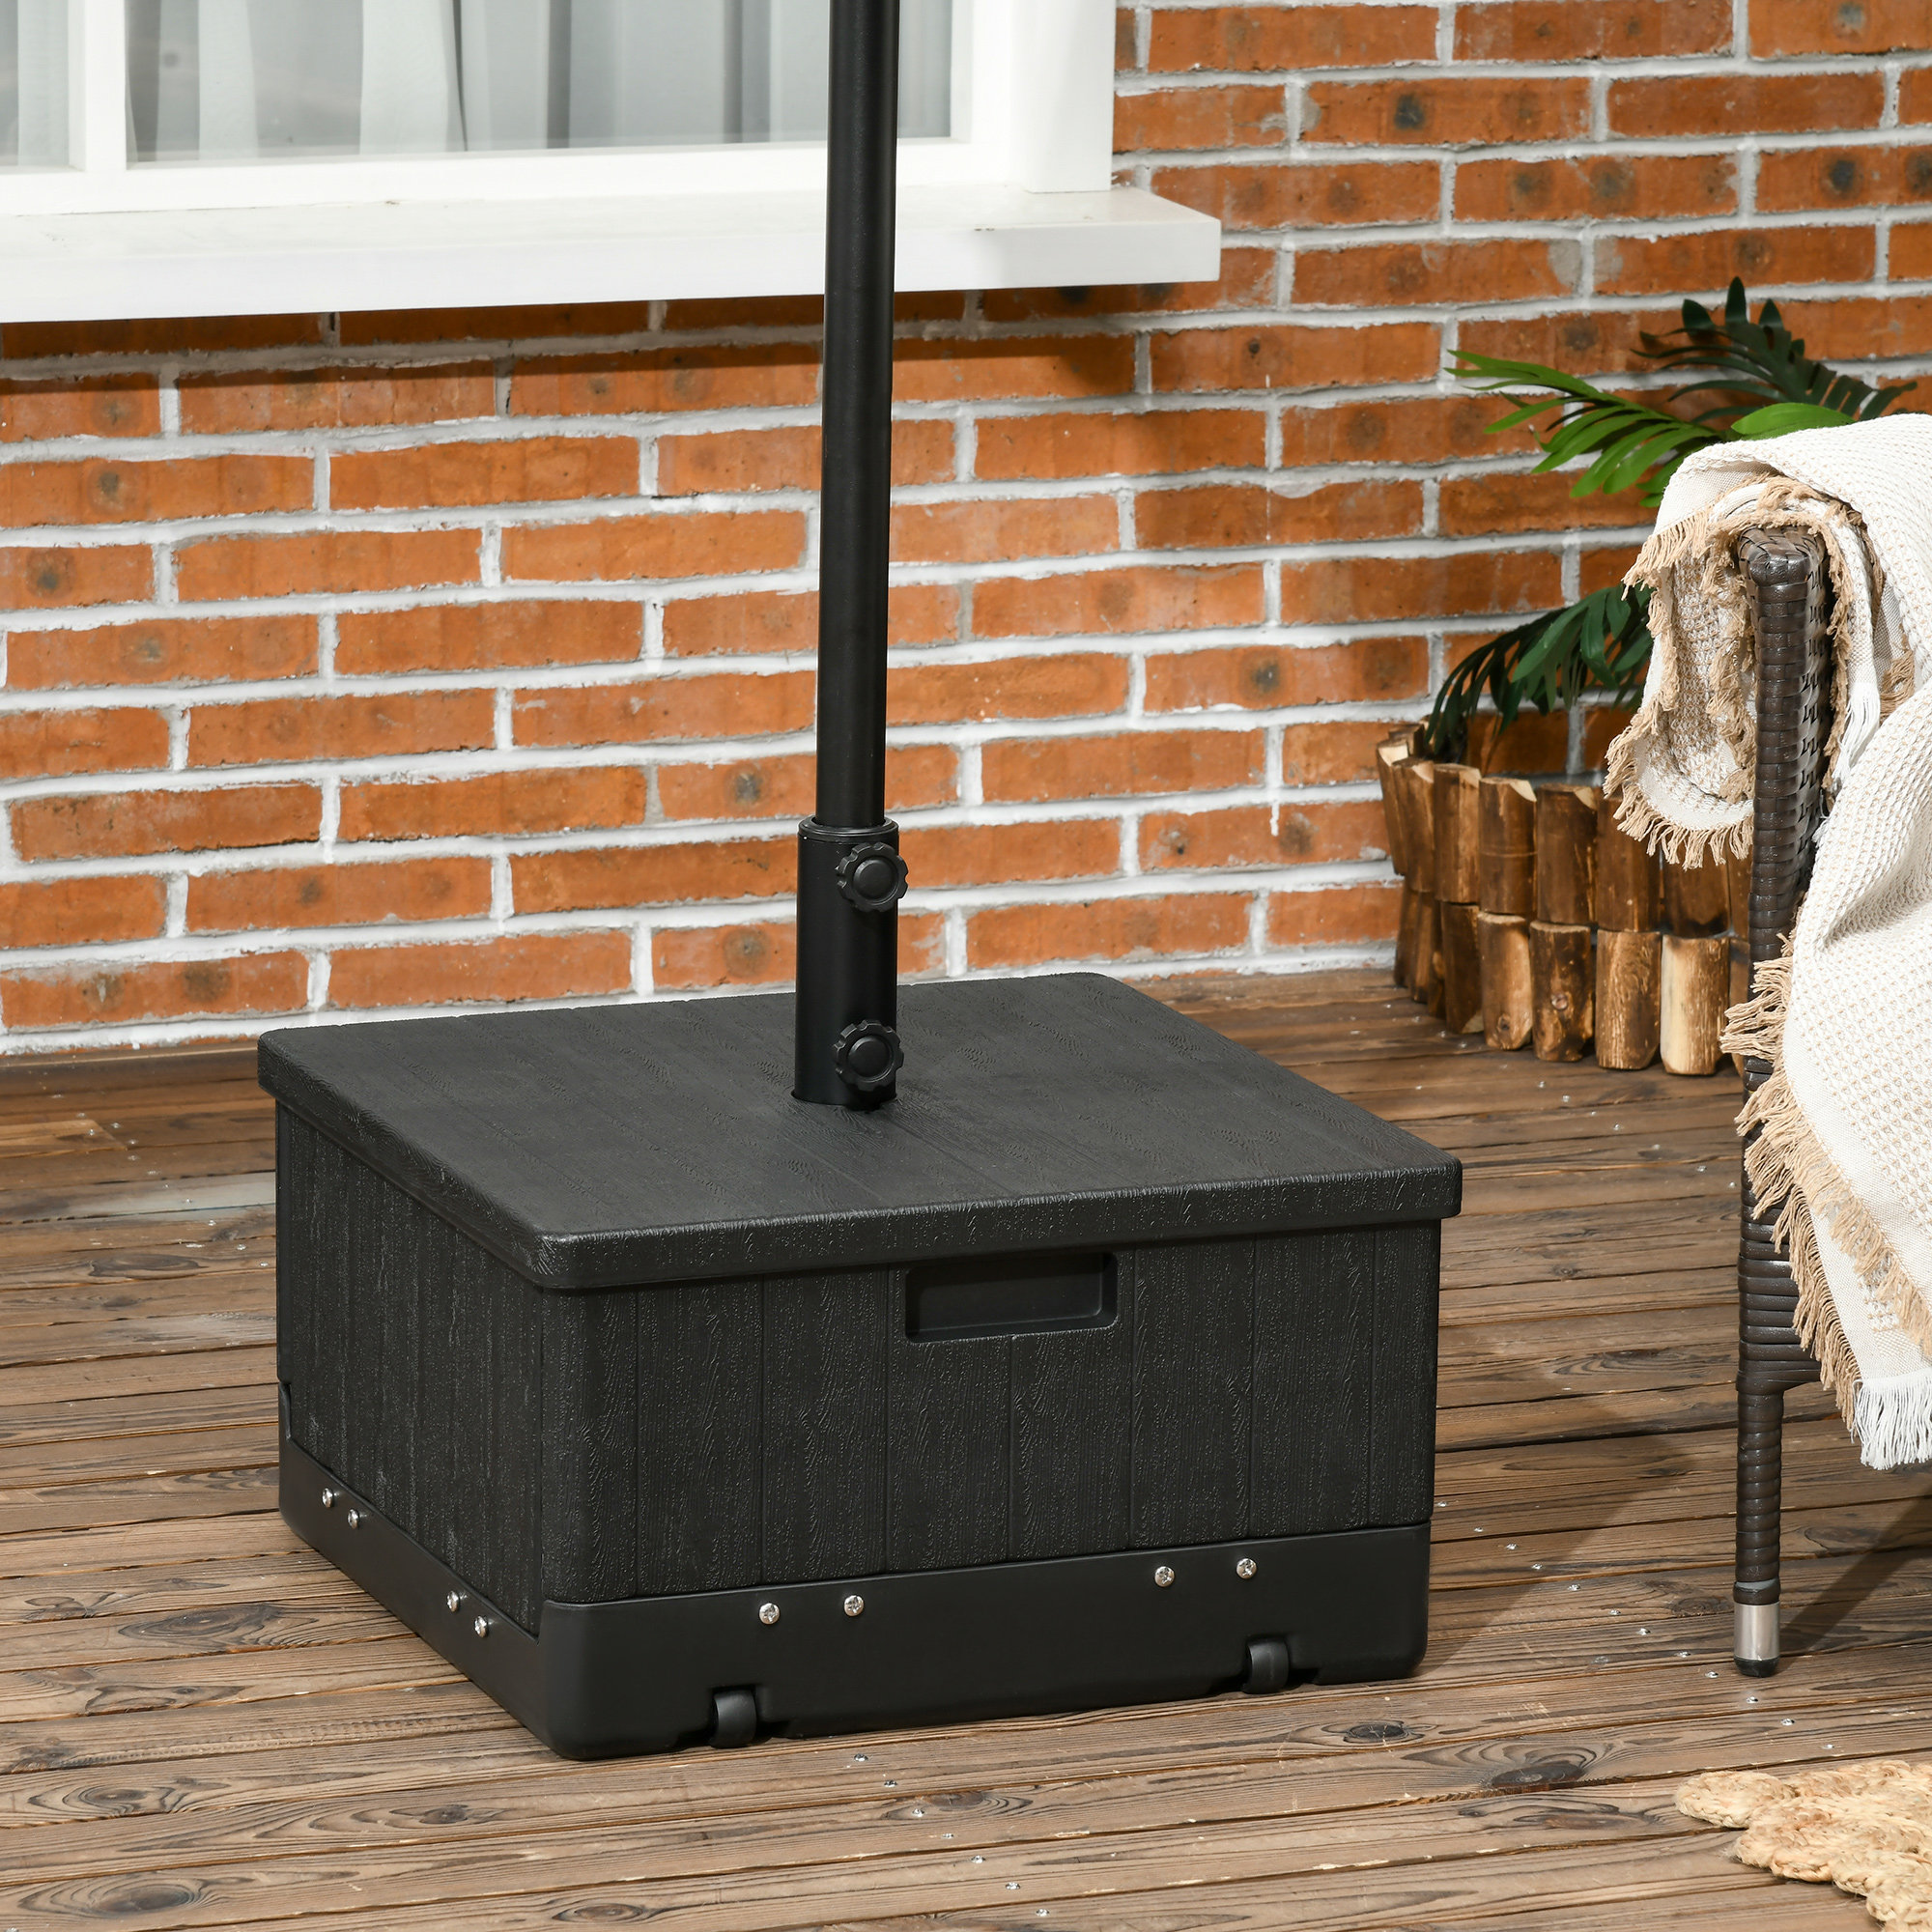 Archie & Oscar™ Woodrow 3-In-1 Outdoor Umbrella Base, Coffee End Table, Planter Box With Drainage, 176Lbs Patio Umbrella Stand Wheels And Handles, Black & Reviews Wayfair